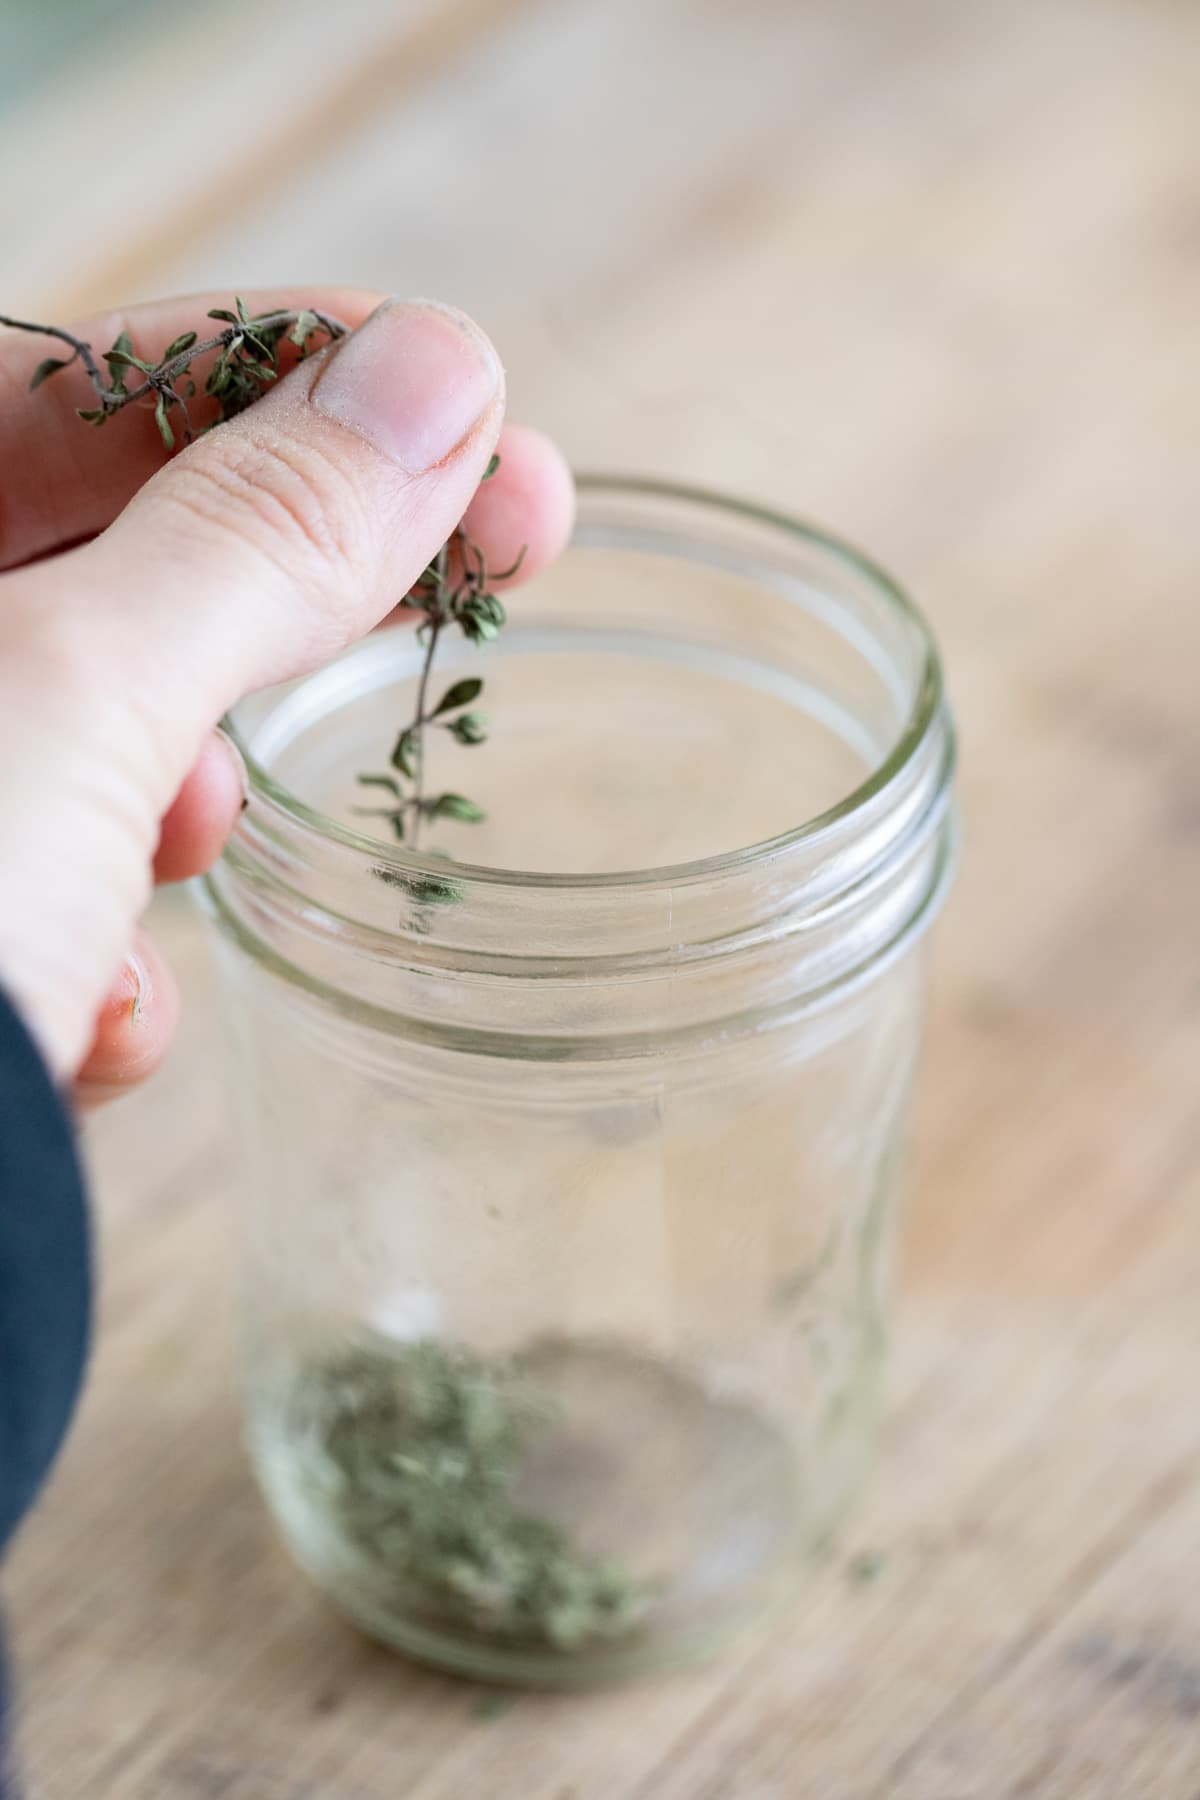 storing thyme in a jar